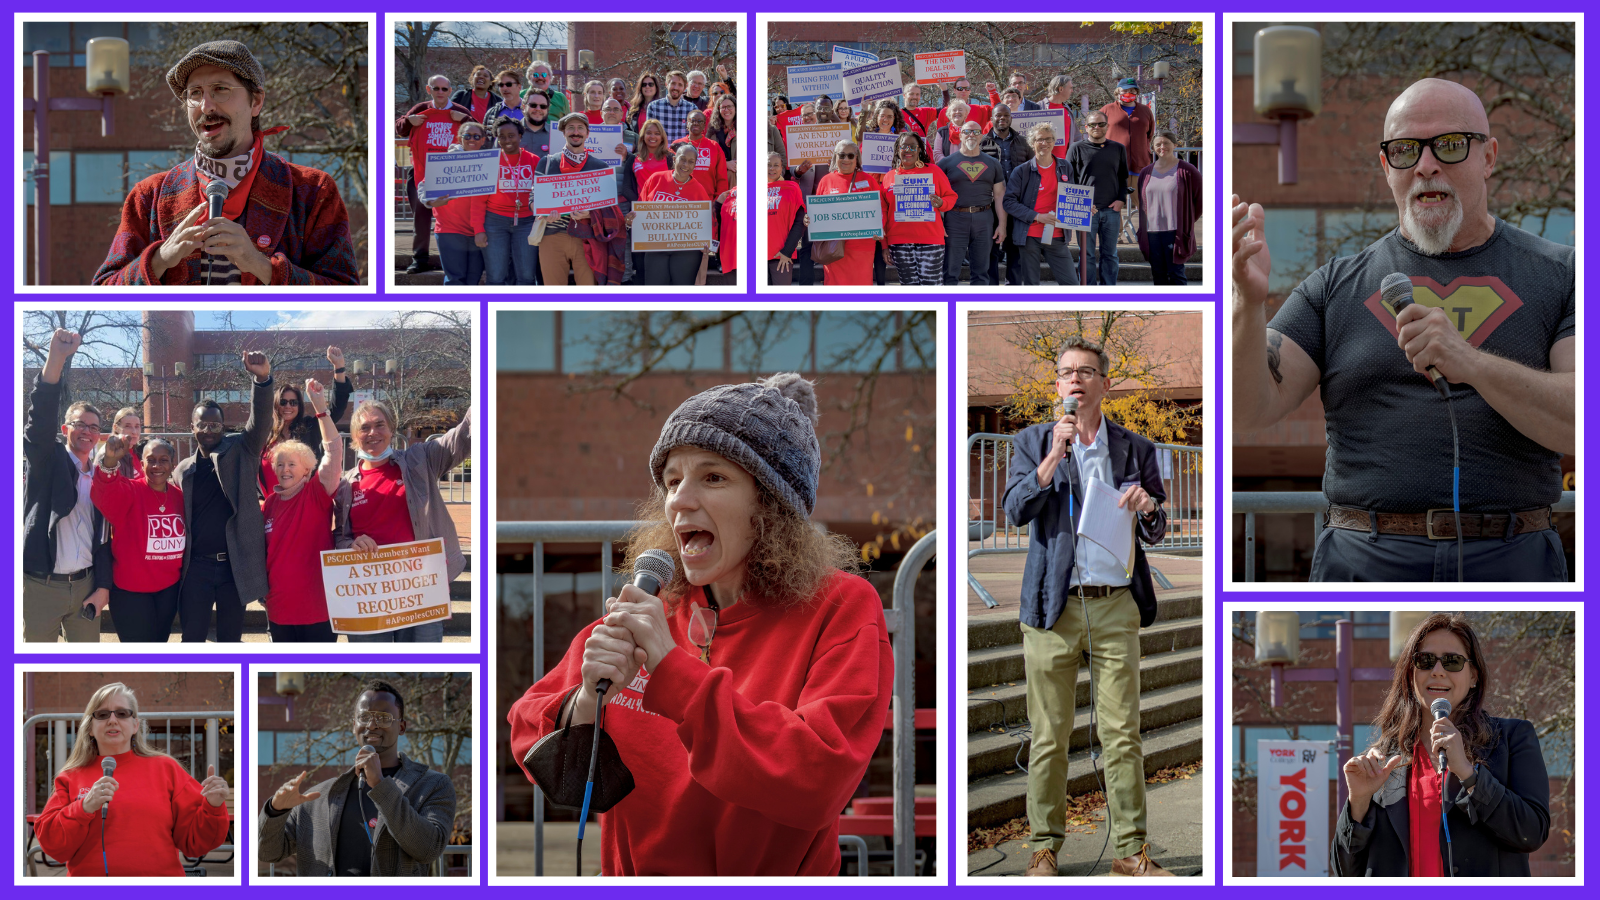 Collage of pictures from Speak Out event at York